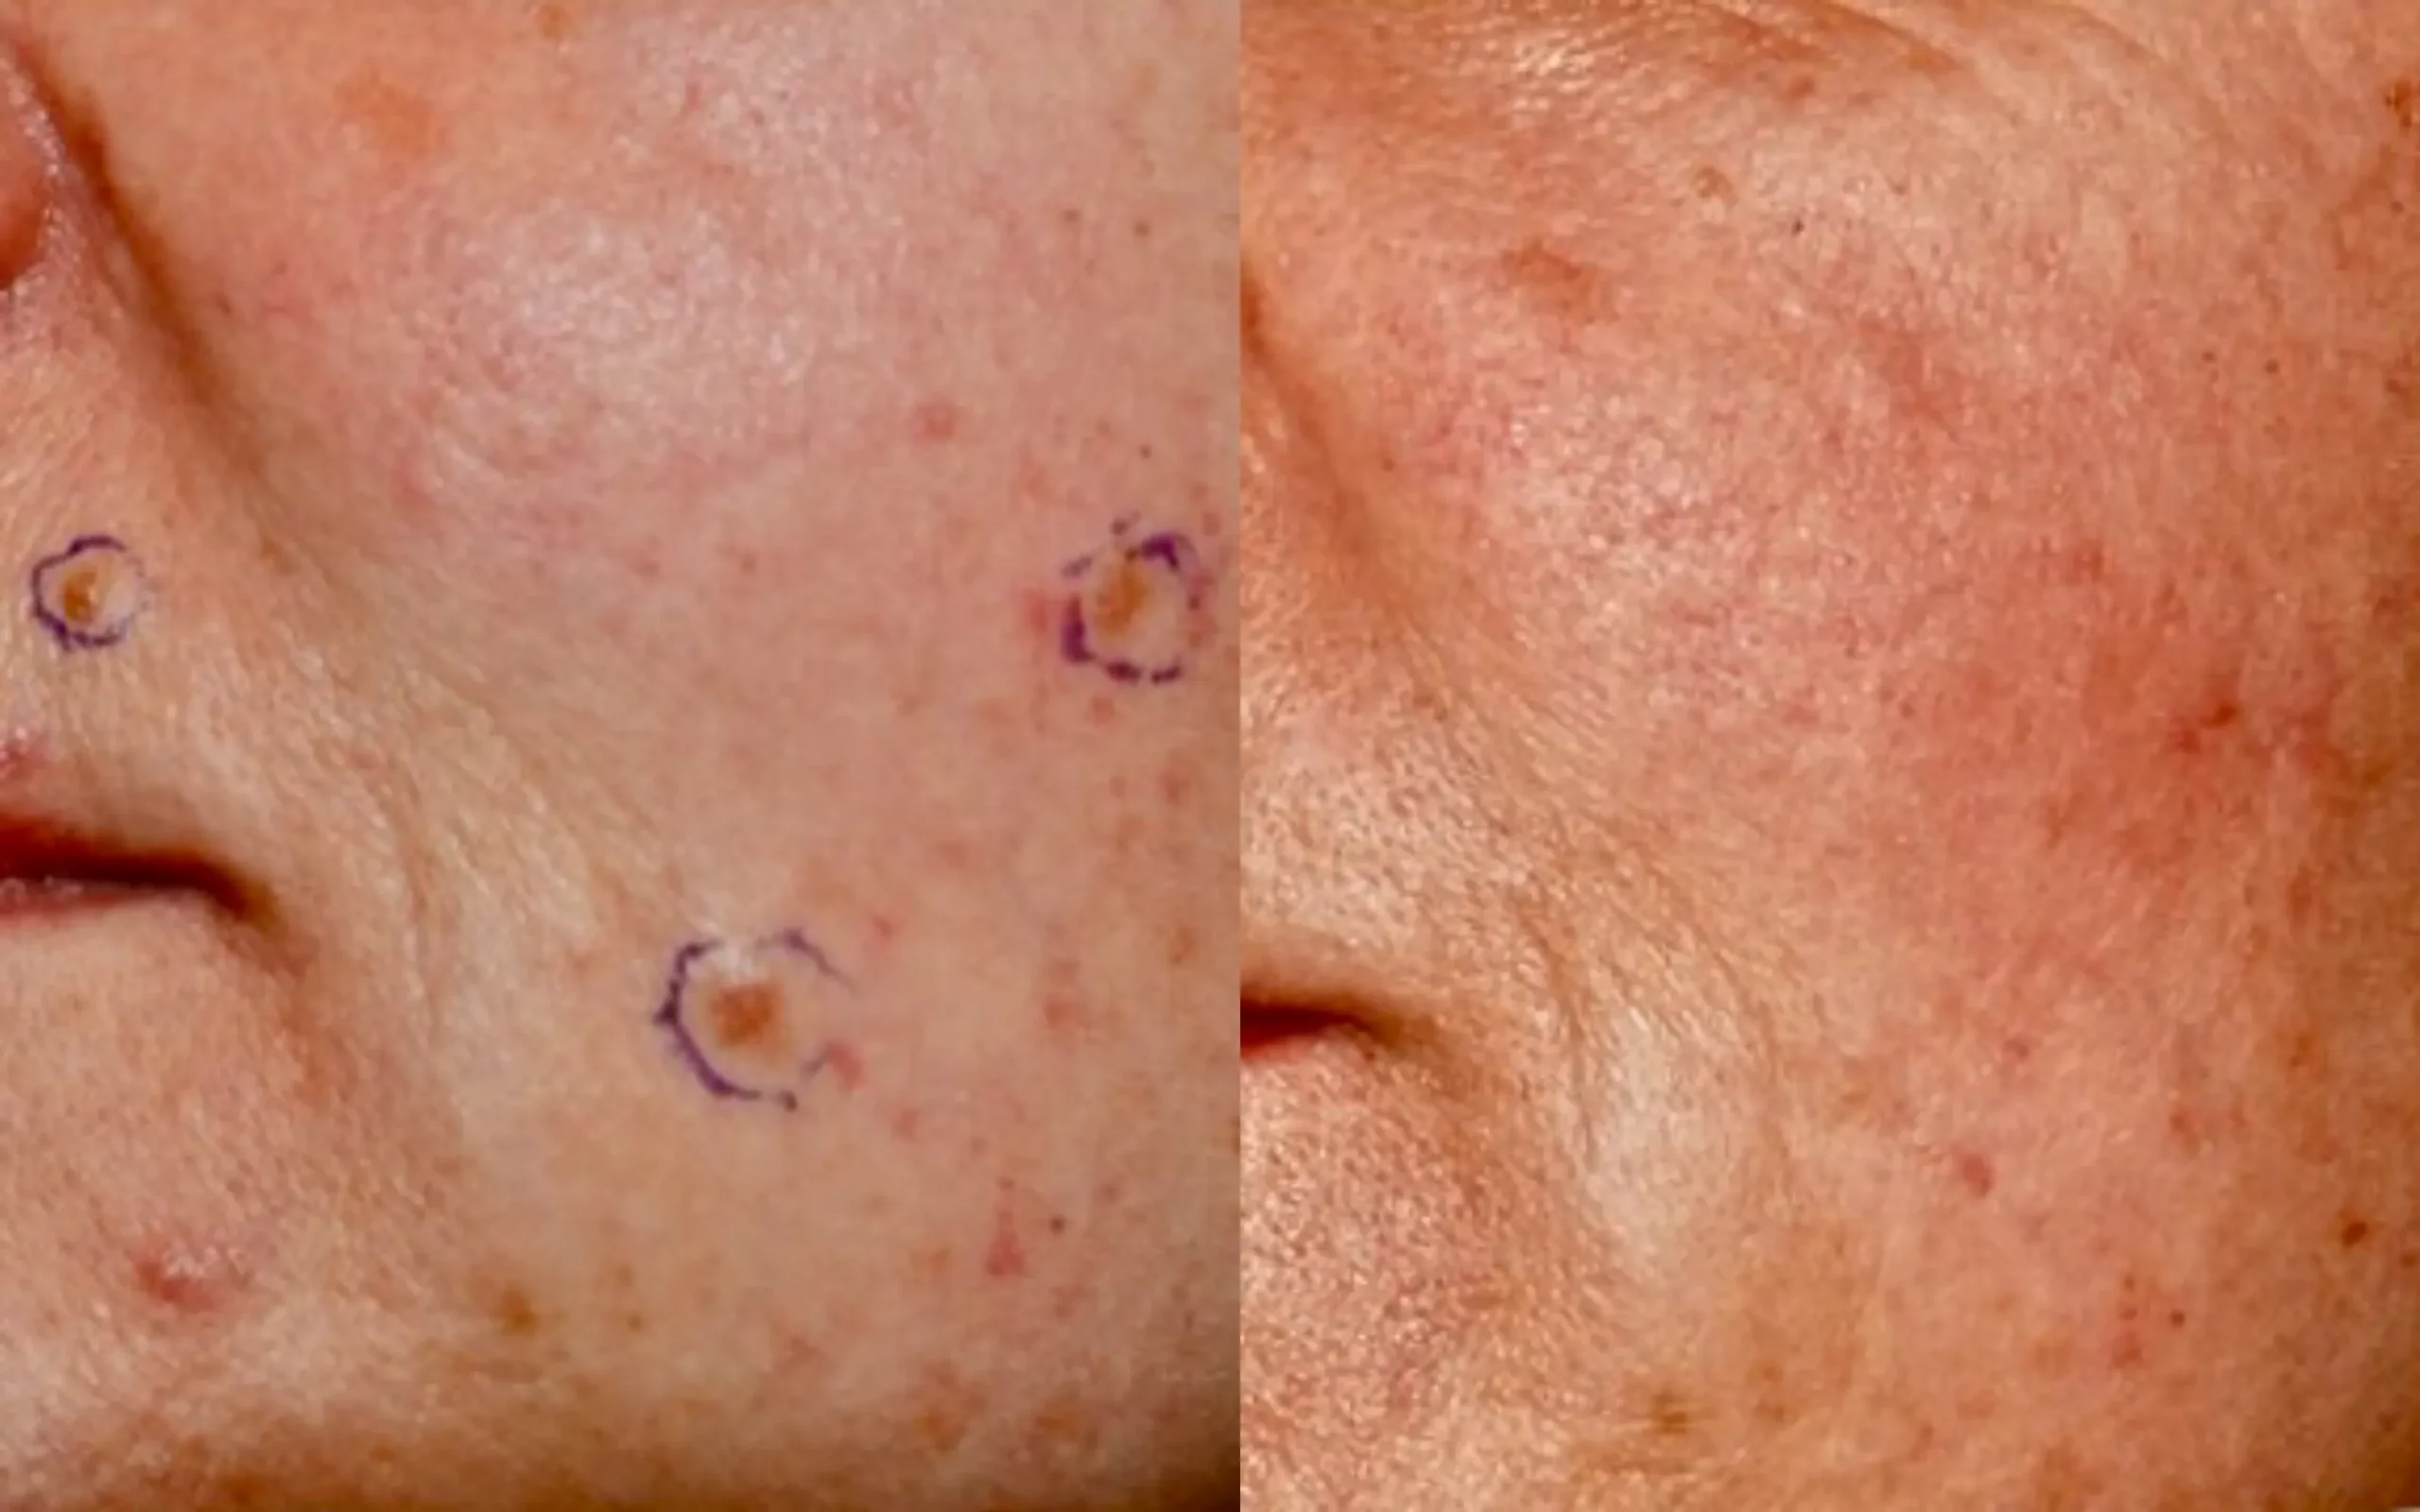 Before and after mole removal